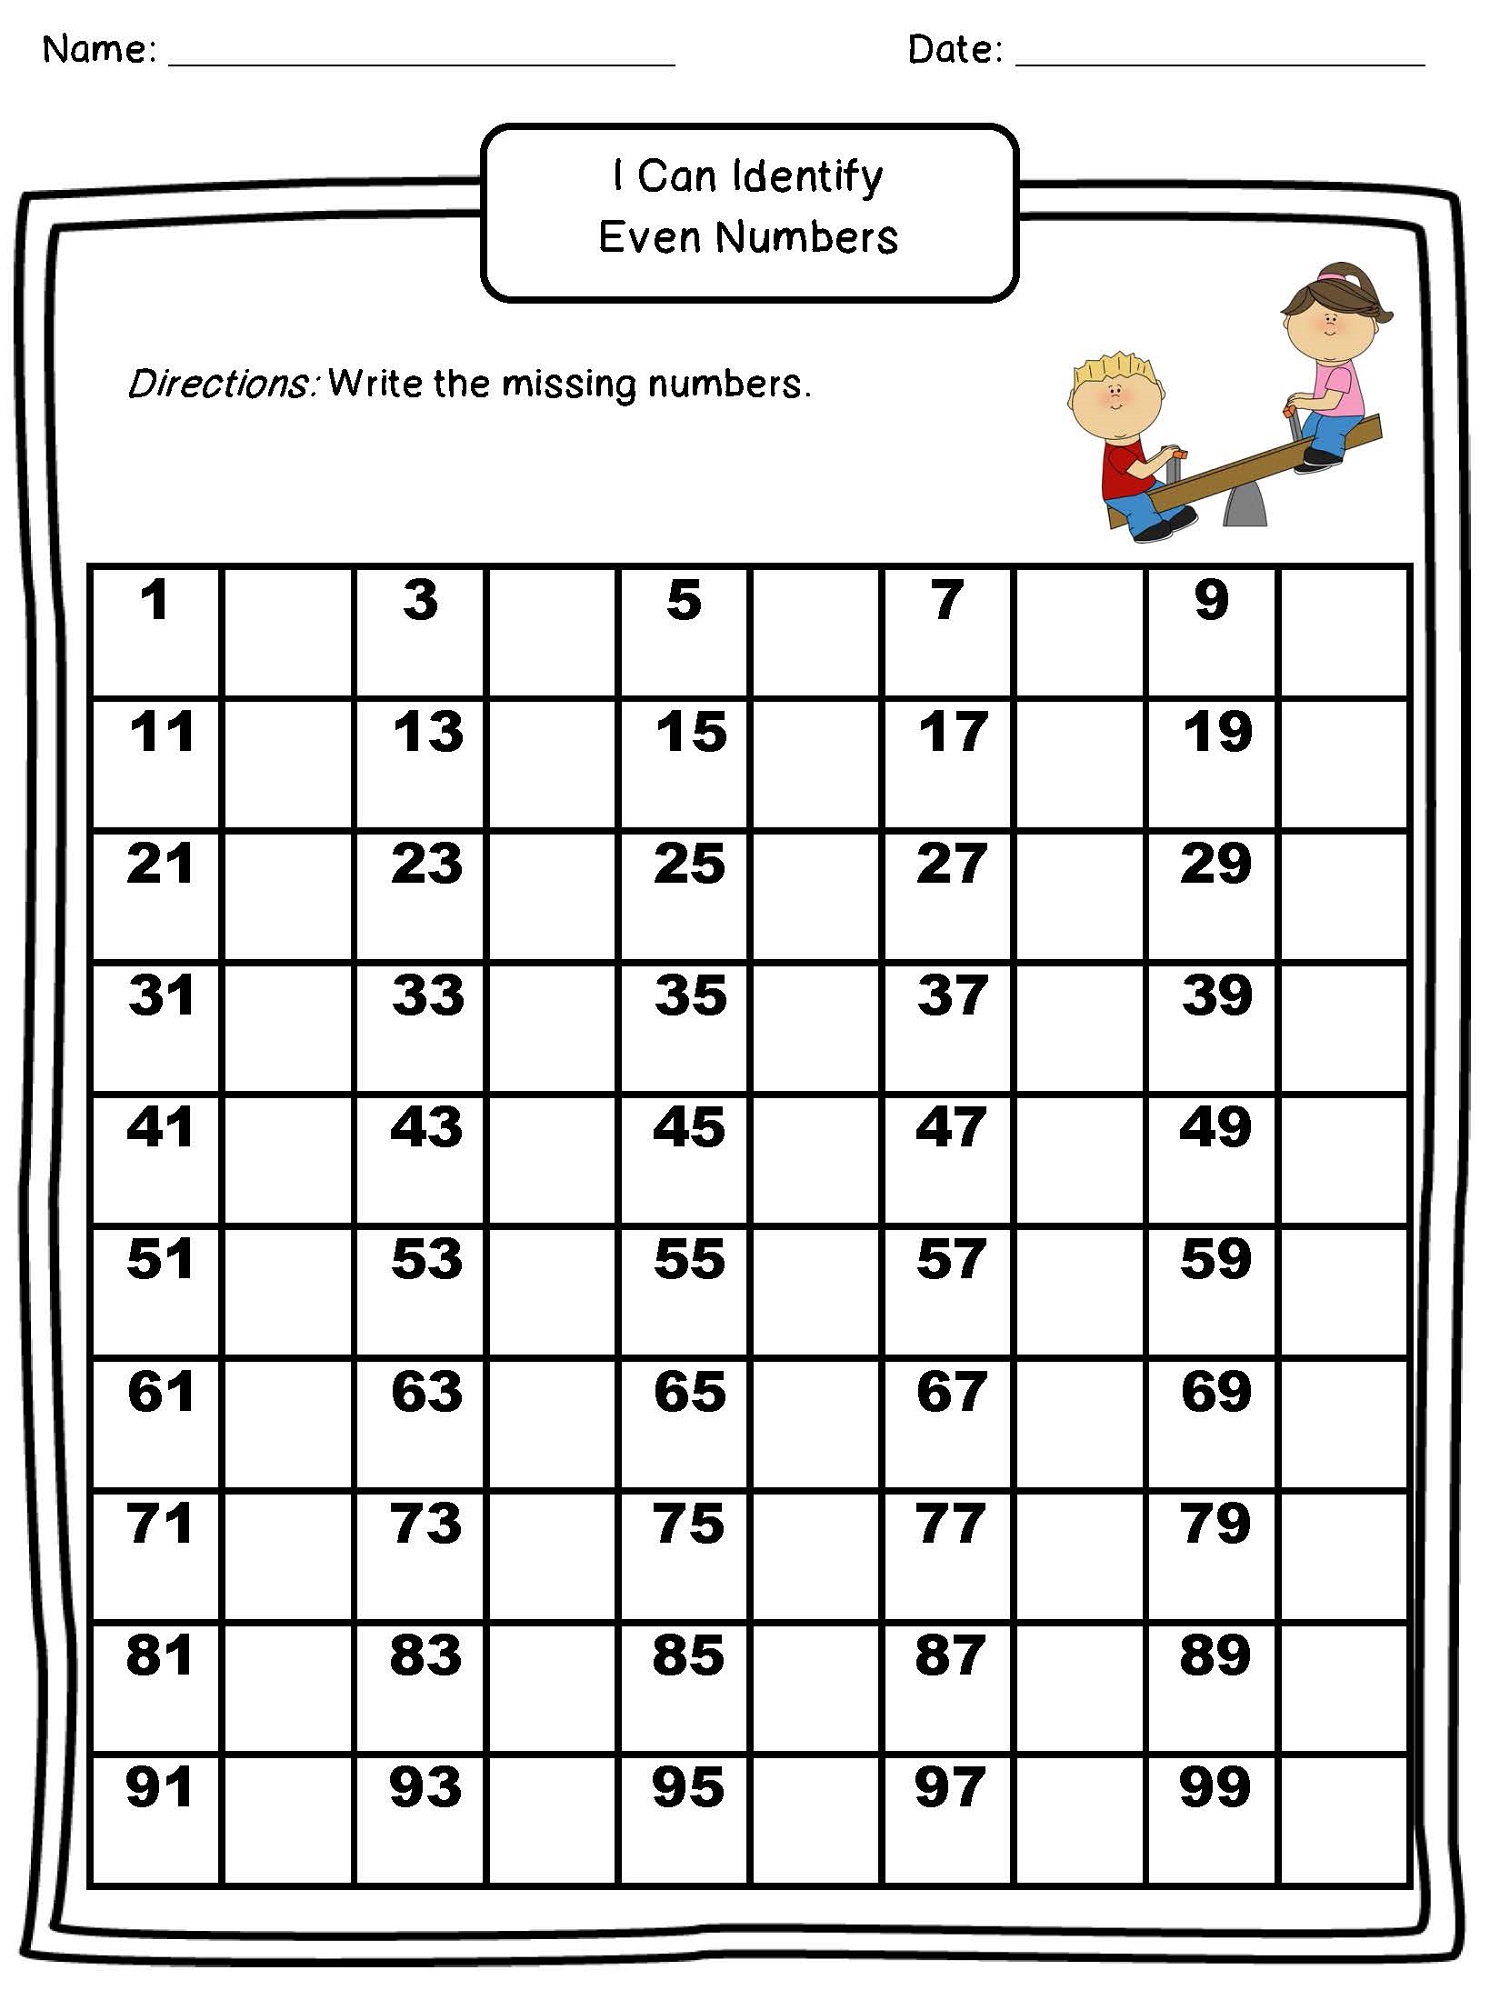 odd-and-even-numbers-worksheets-activity-shelter